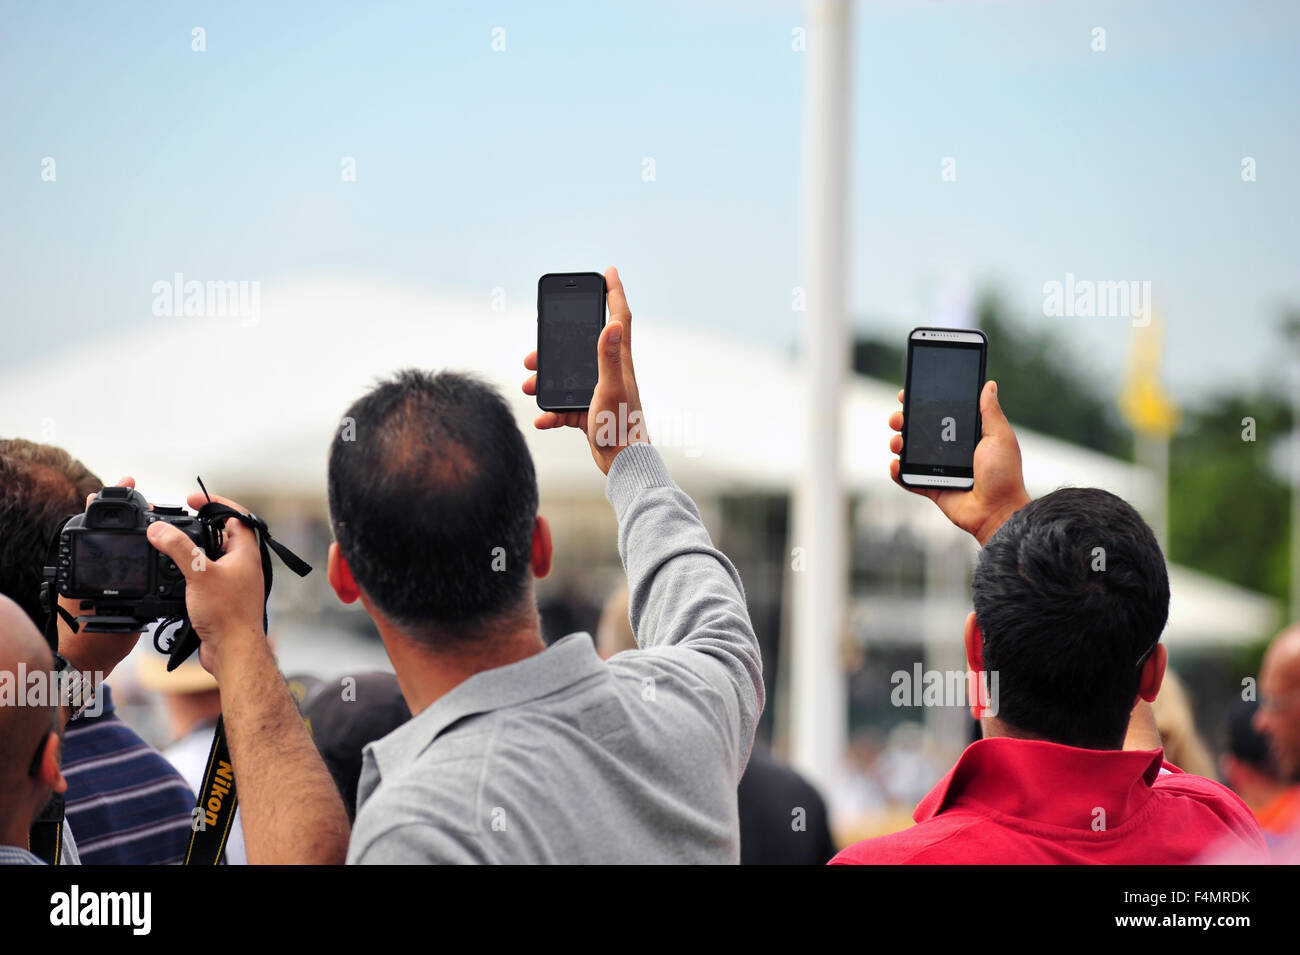 The crowd use cameras and smartphones to take photos at the Goodwood Festival of Speed in the UK. Stock Photo